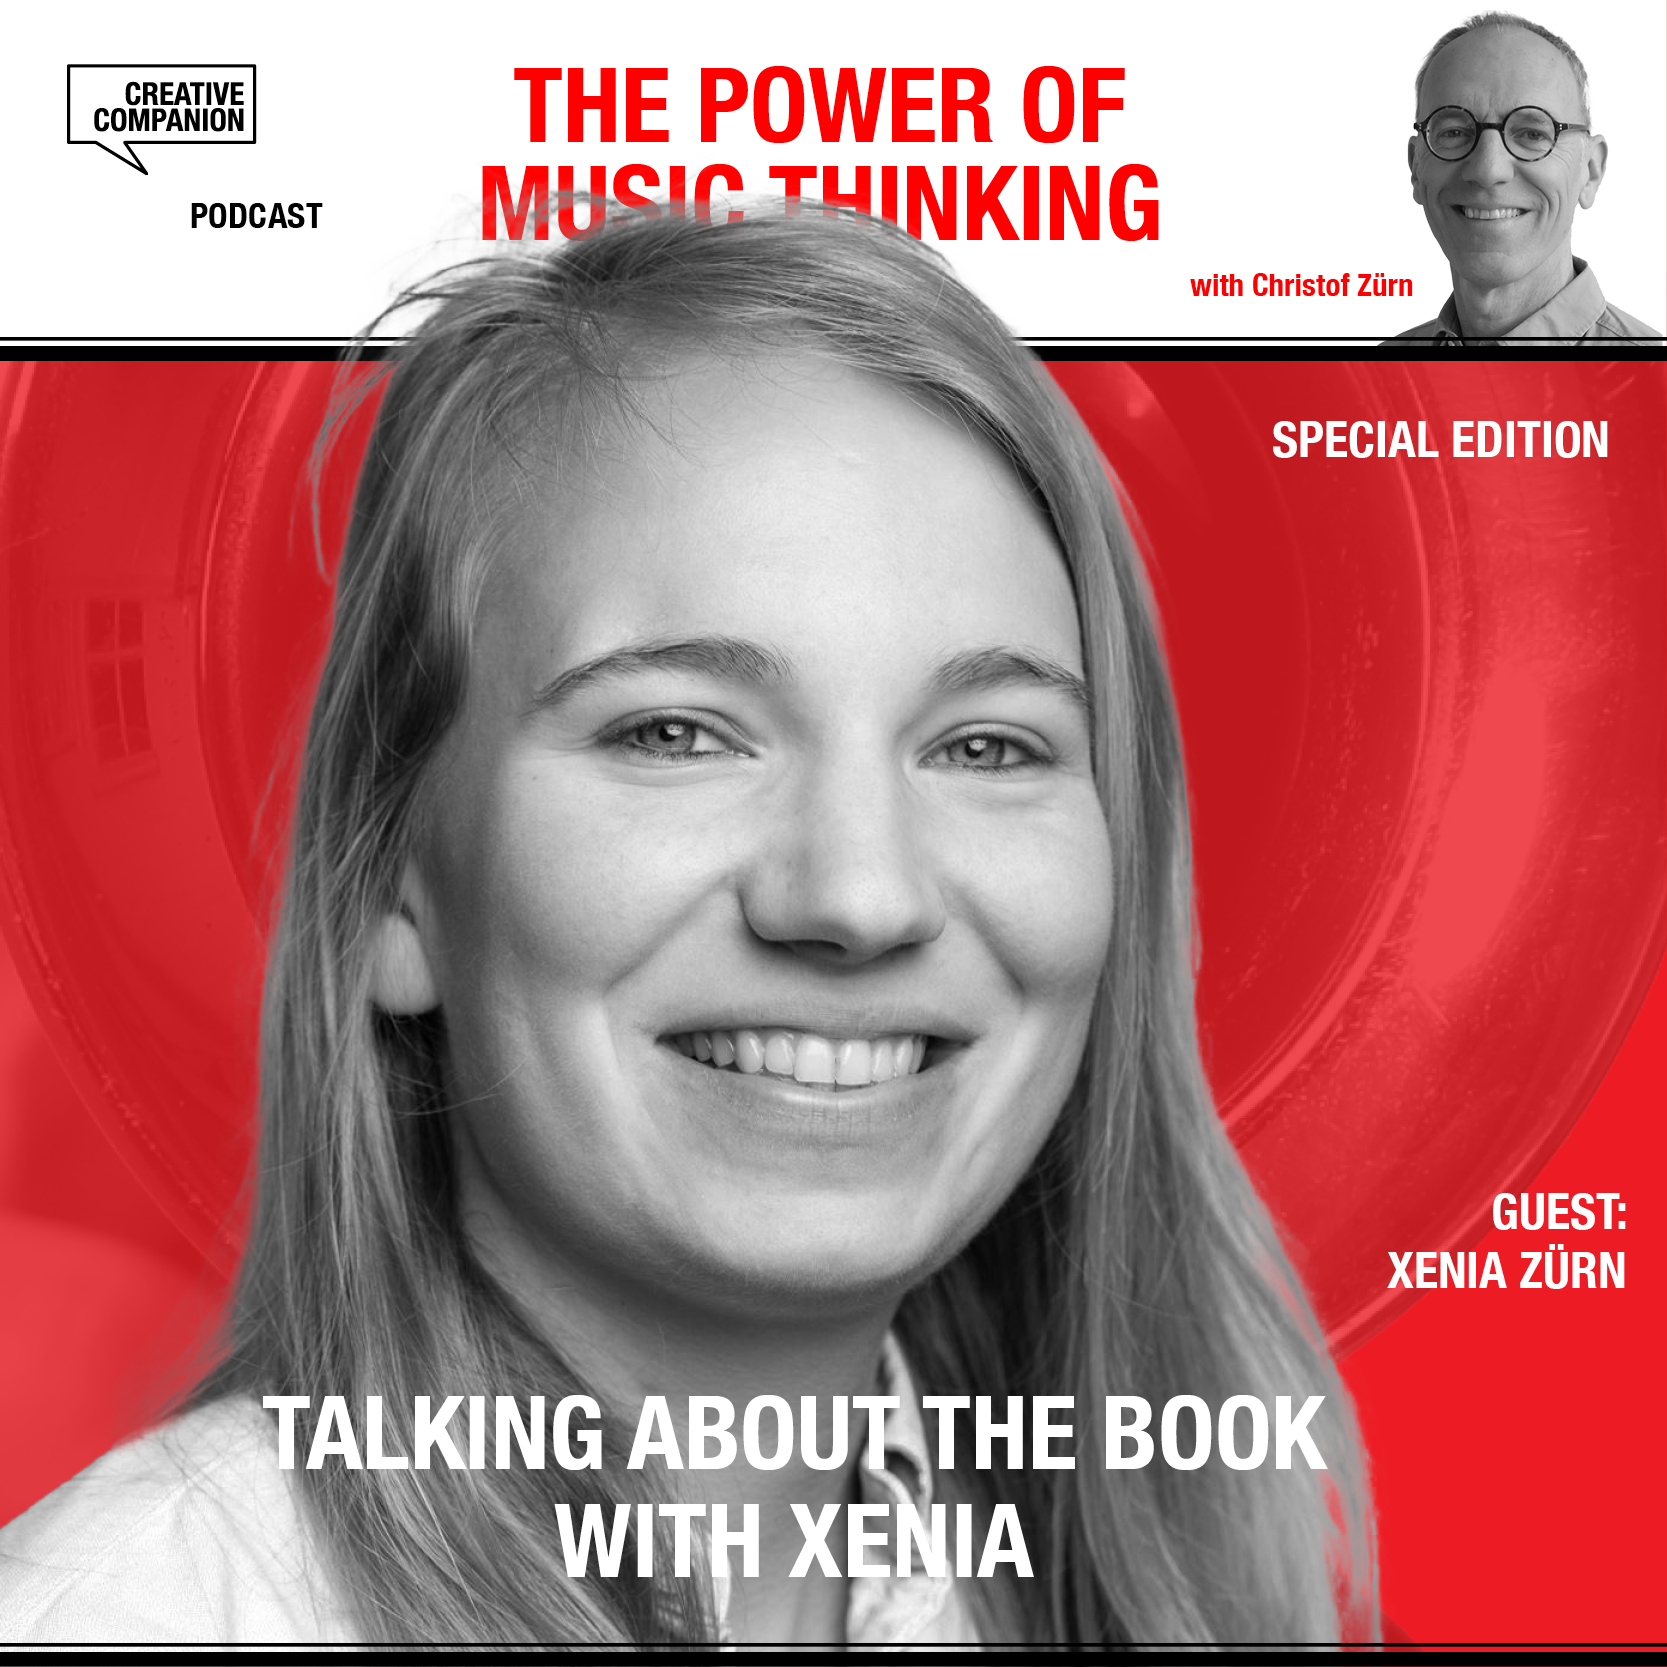 Talking about the Book The Power of Music Thinking with Xenia Zürn